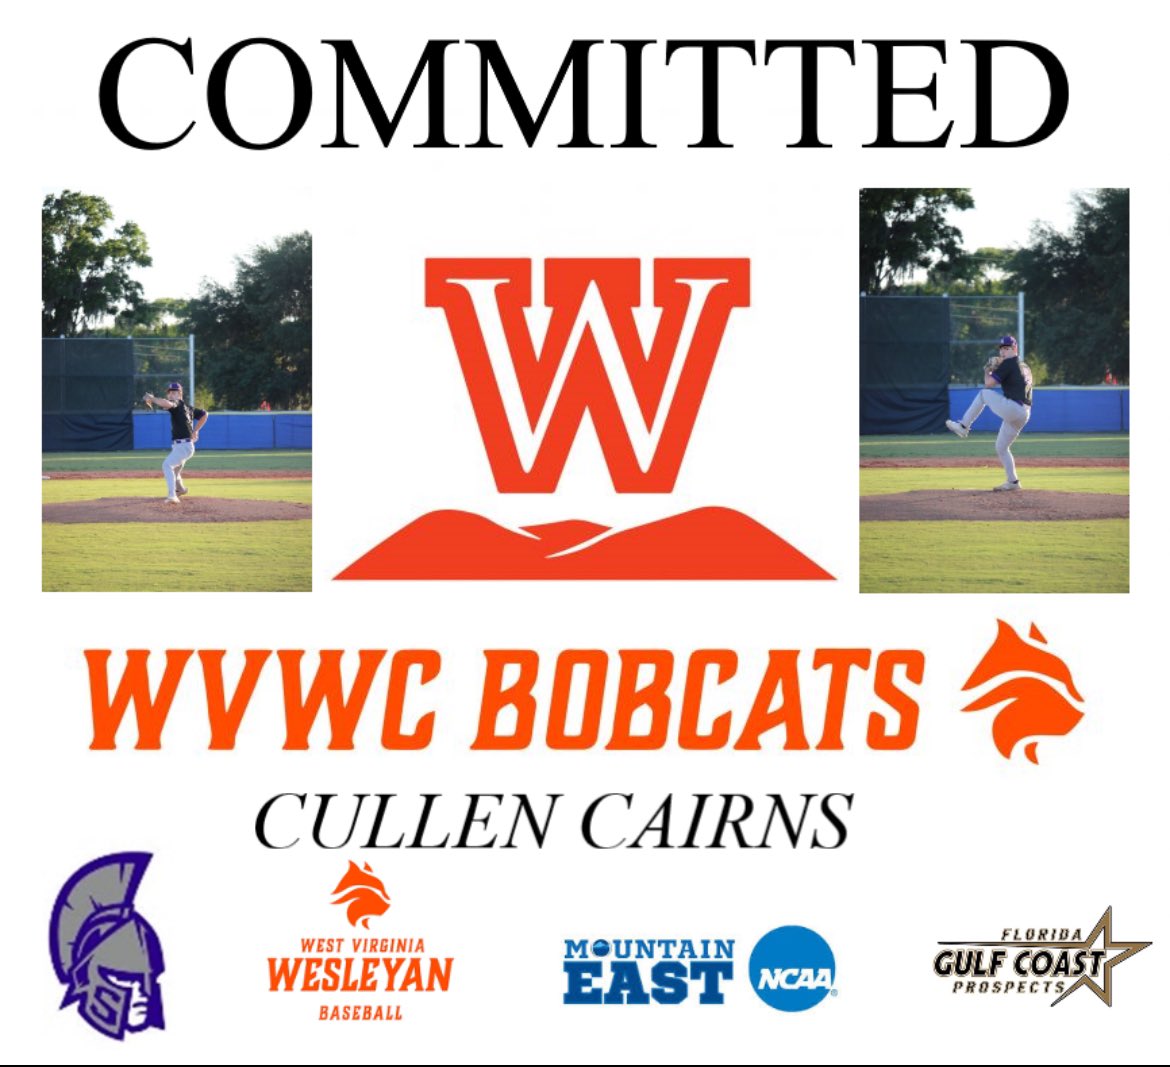 I am humbled and excited to announce that I will be continuing my academic and athletic career at WVWC ! I want to thank God, my family, friends, and all the coaches who have supported me and my love for baseball!! Special thanks to Coach Seth, Coach Tony, and Coach Knight!